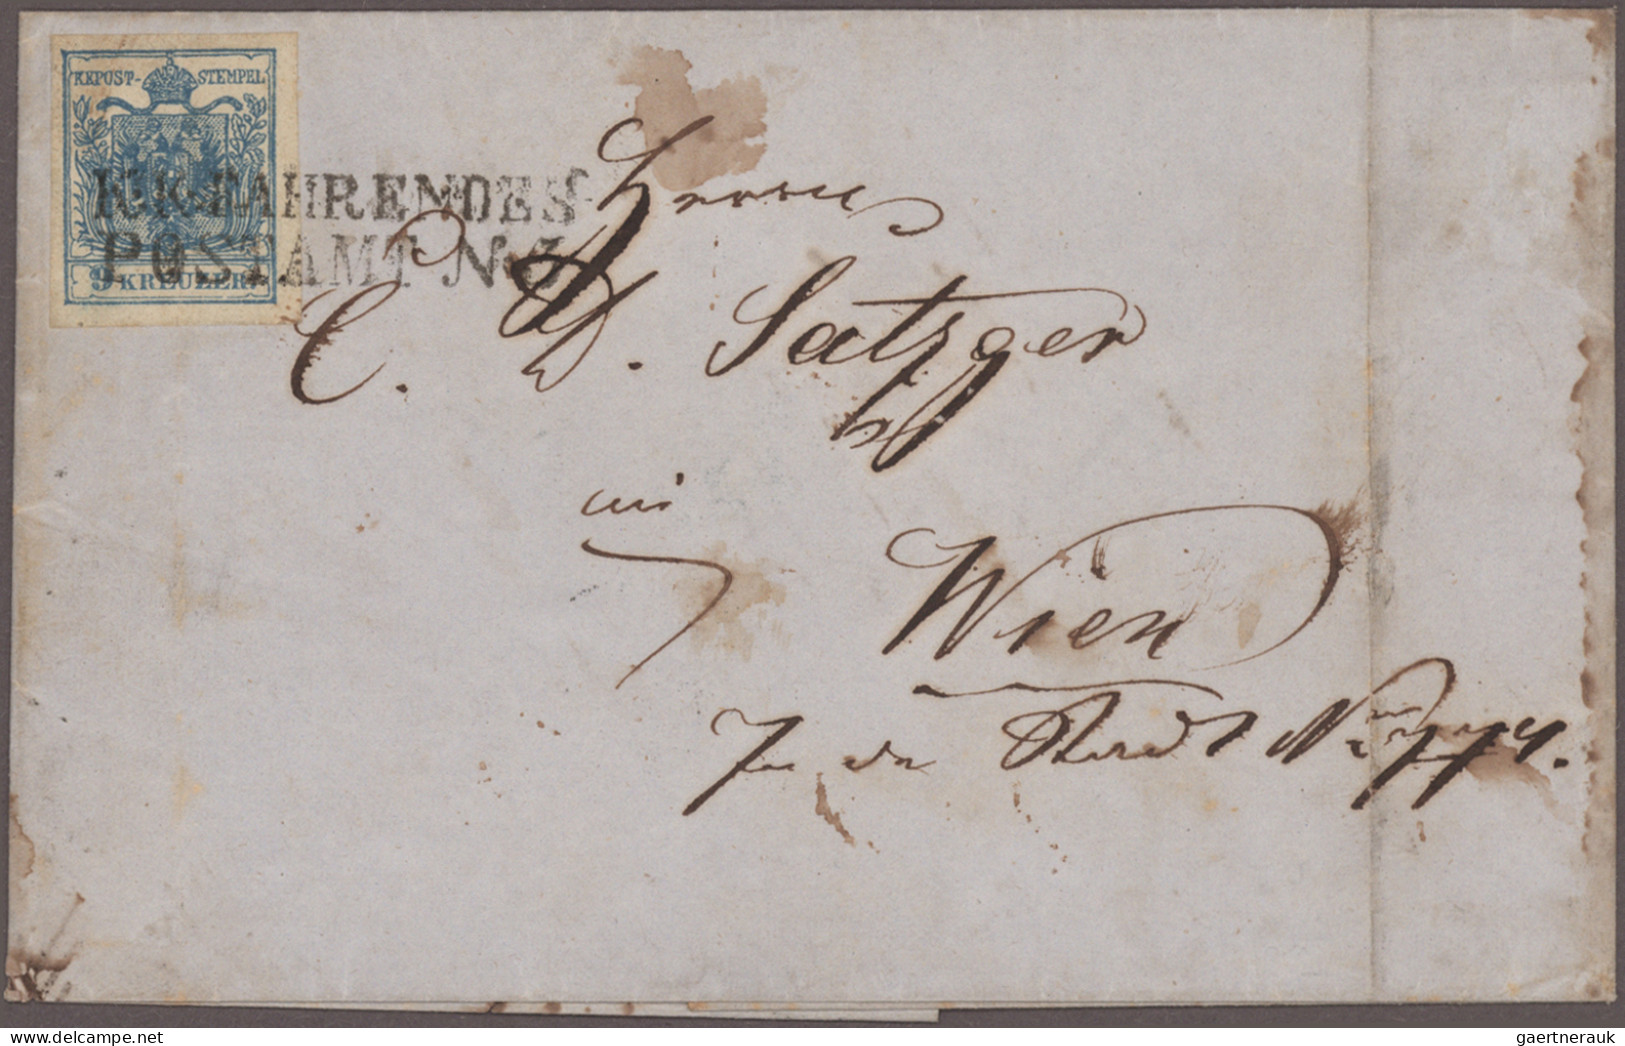 Europe: 1850-modern: About 240-250 covers, postcards and postal stationery items